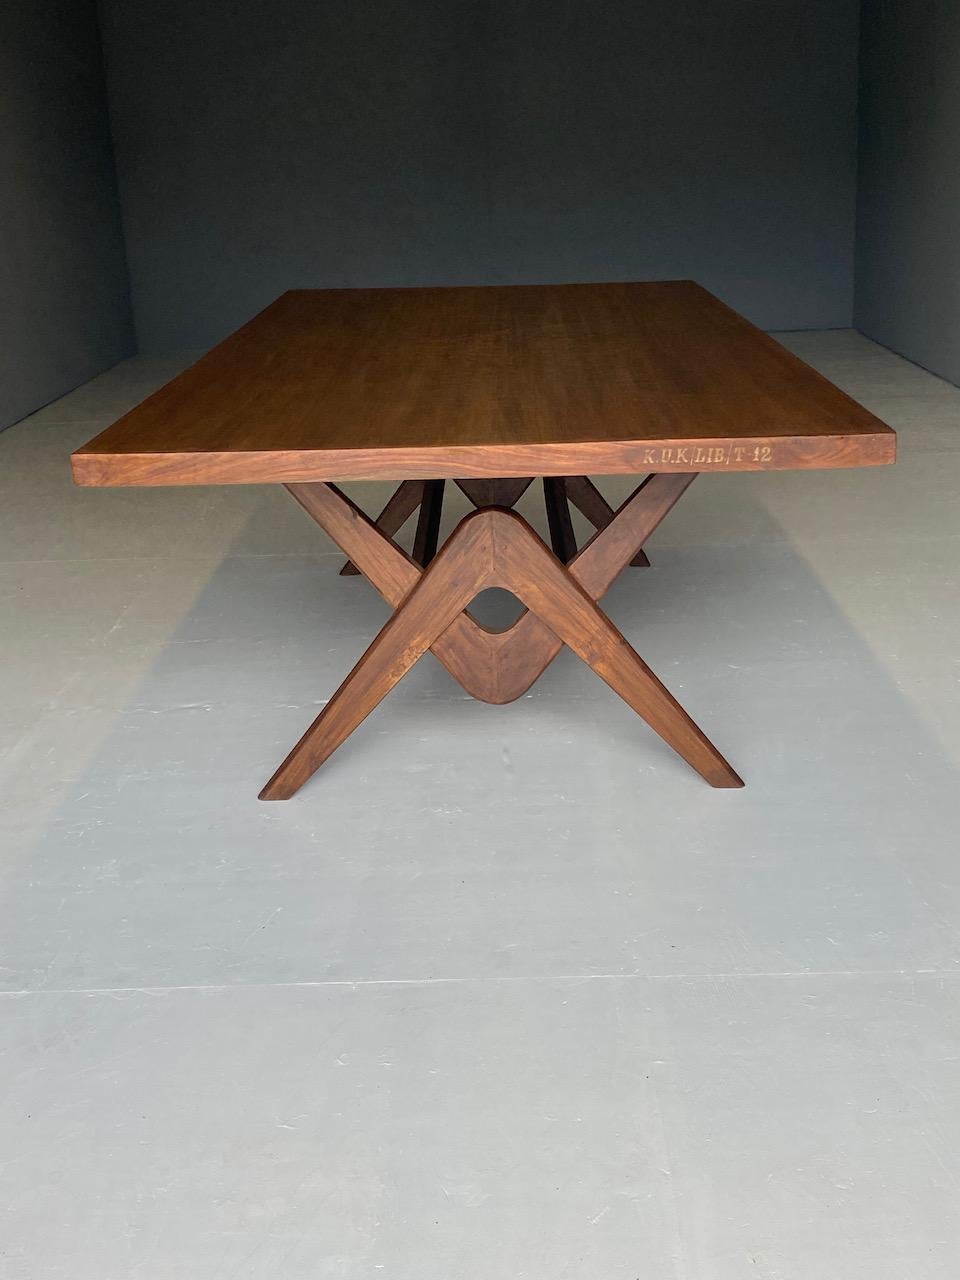 Indian Pierre Jeanneret Committee Table in Teak Chandigarh India Circa 1963-64